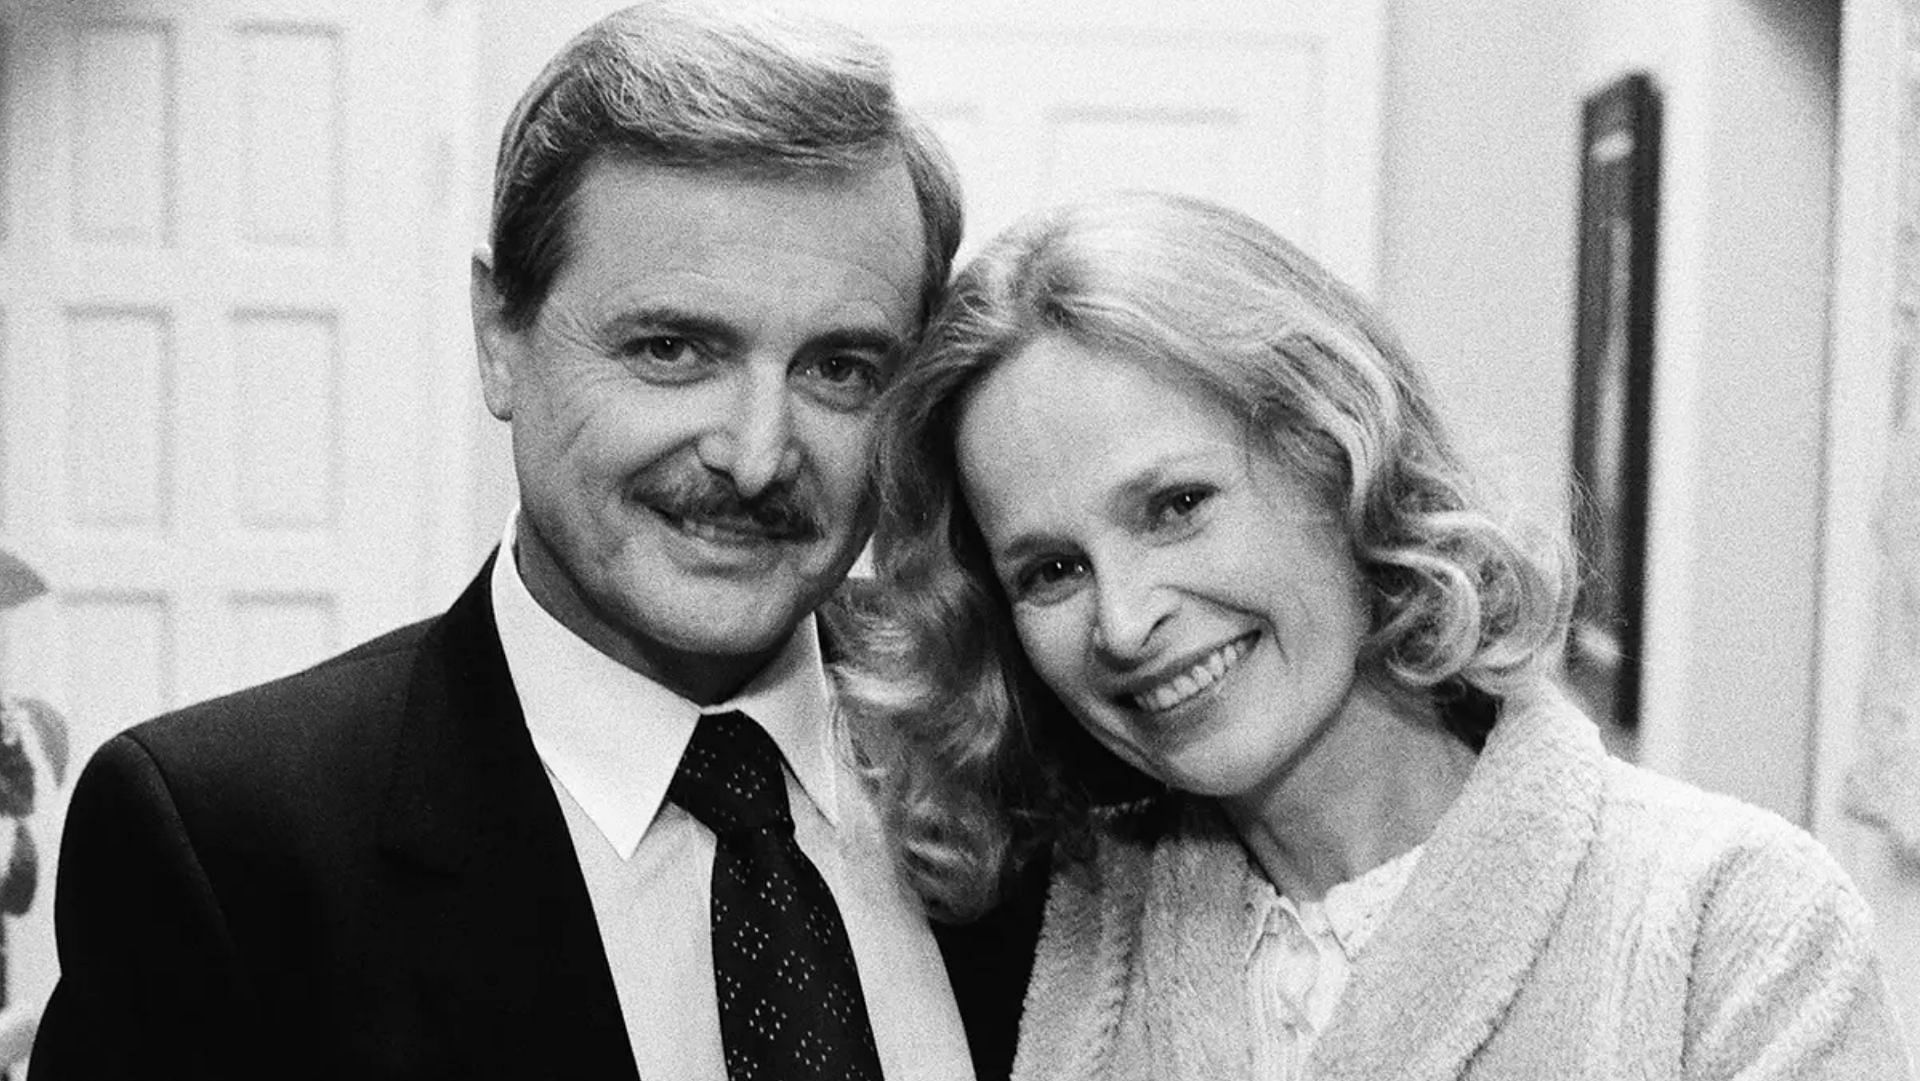 William Daniels and Bonnie Bartlett. (Image via Getty Images)